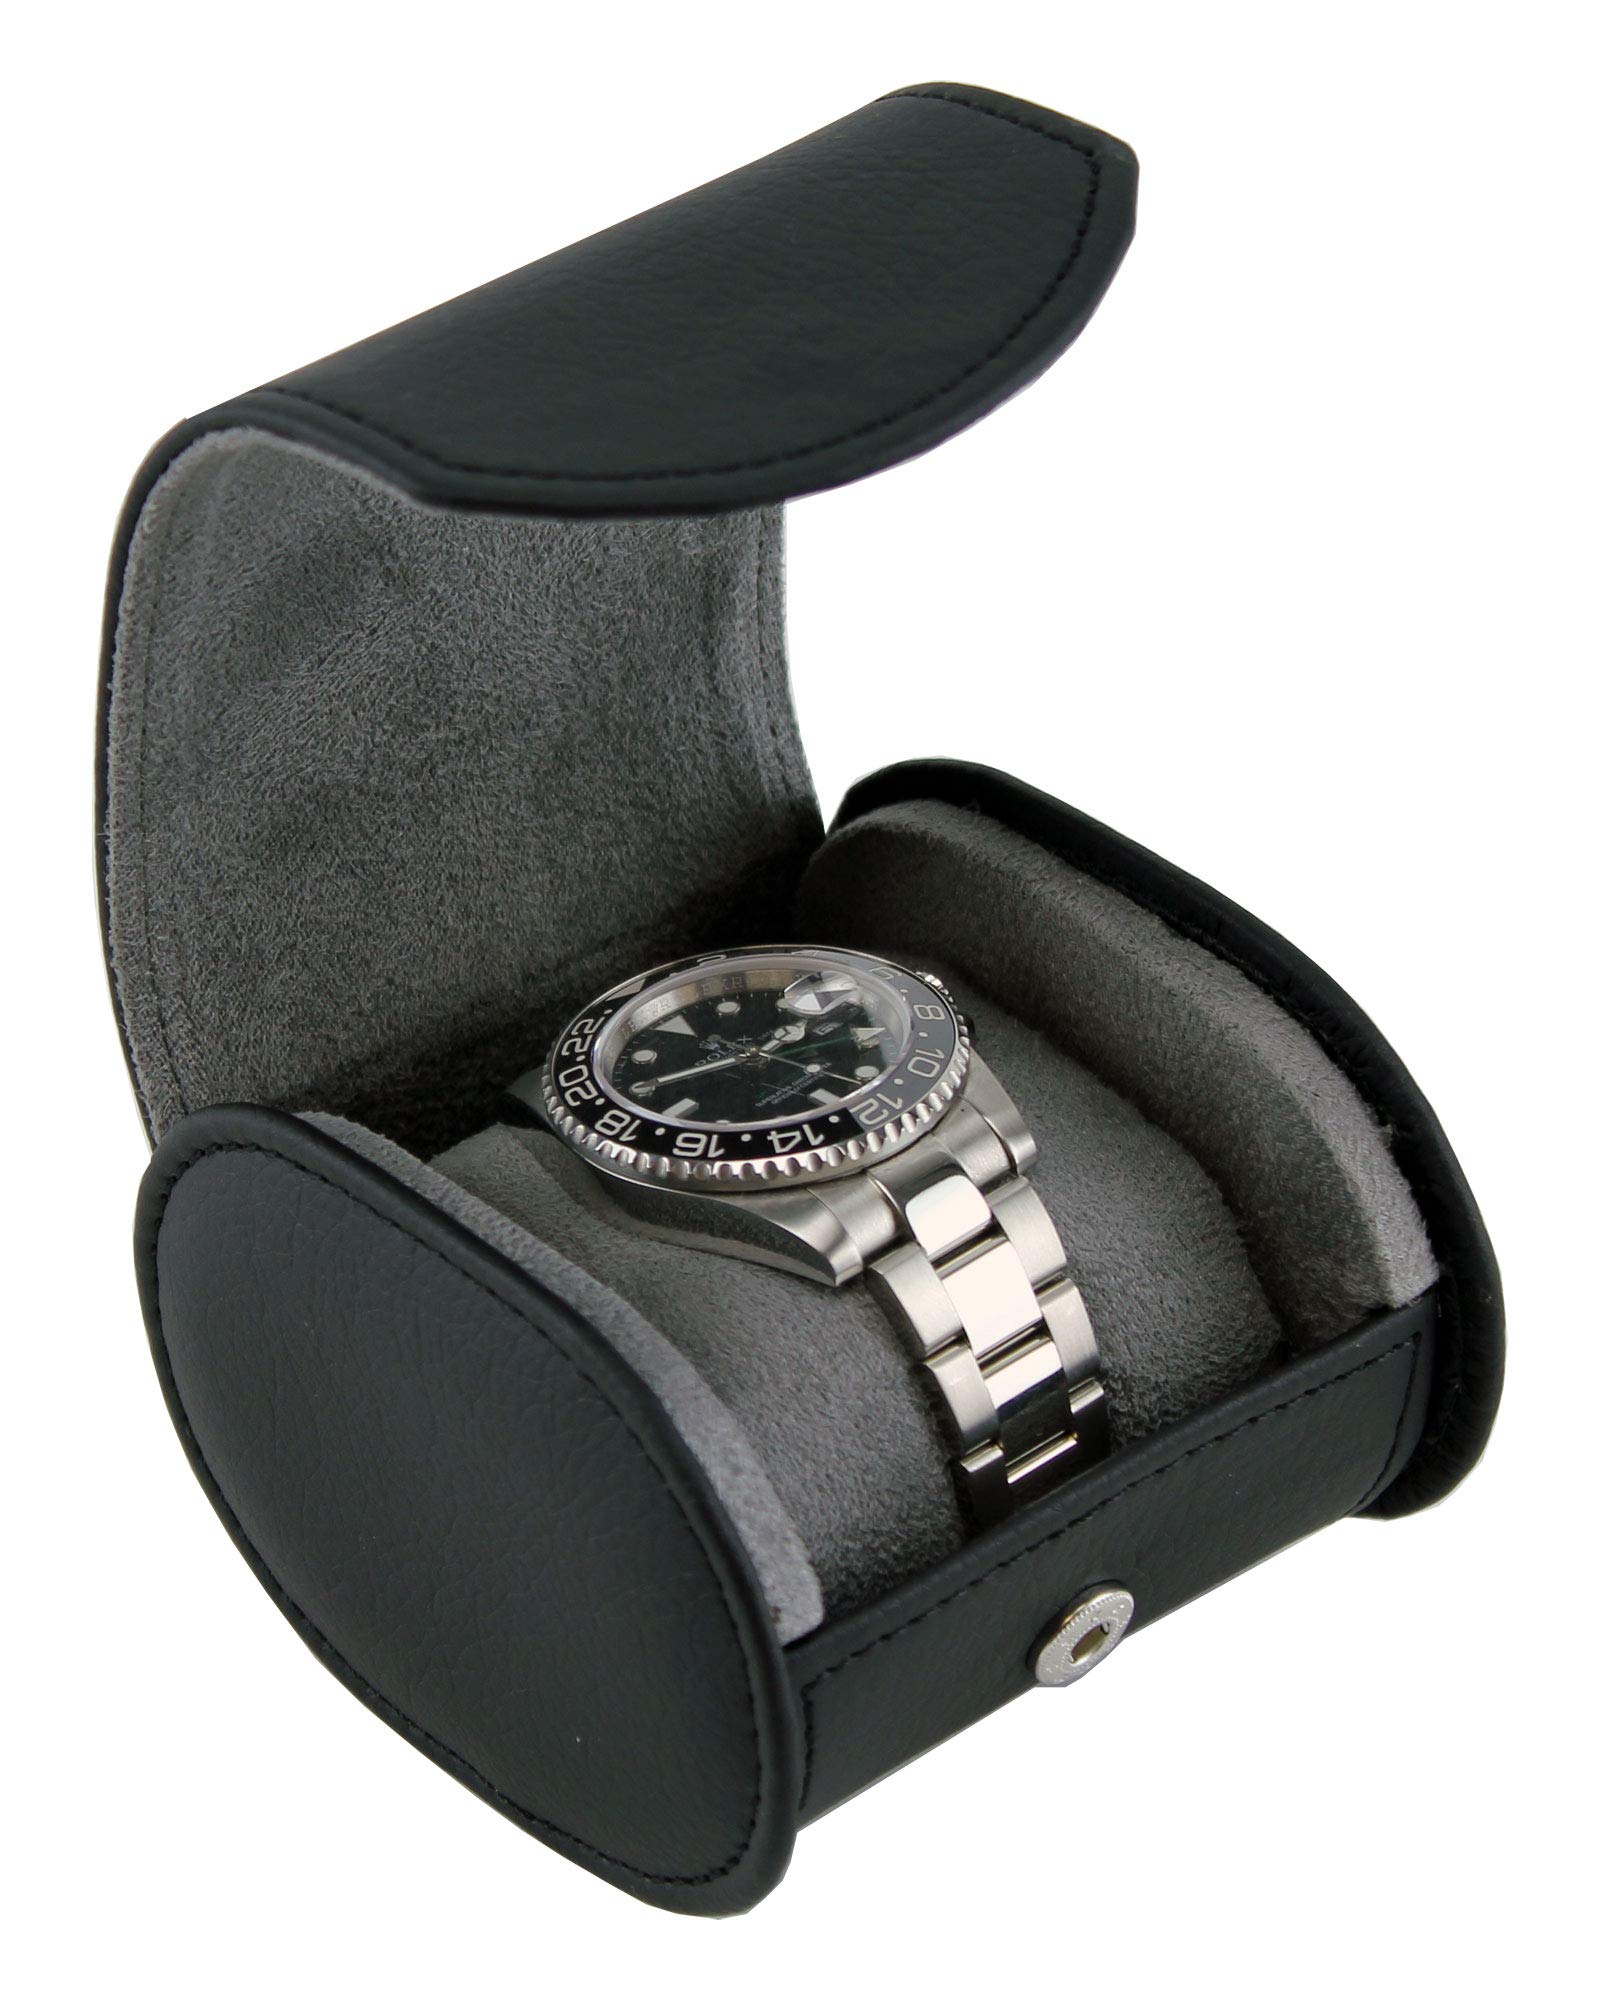 Heiden Travel Watch Case for Men - Black Leather Watch Box Roll - Great for Travel with Large Watches